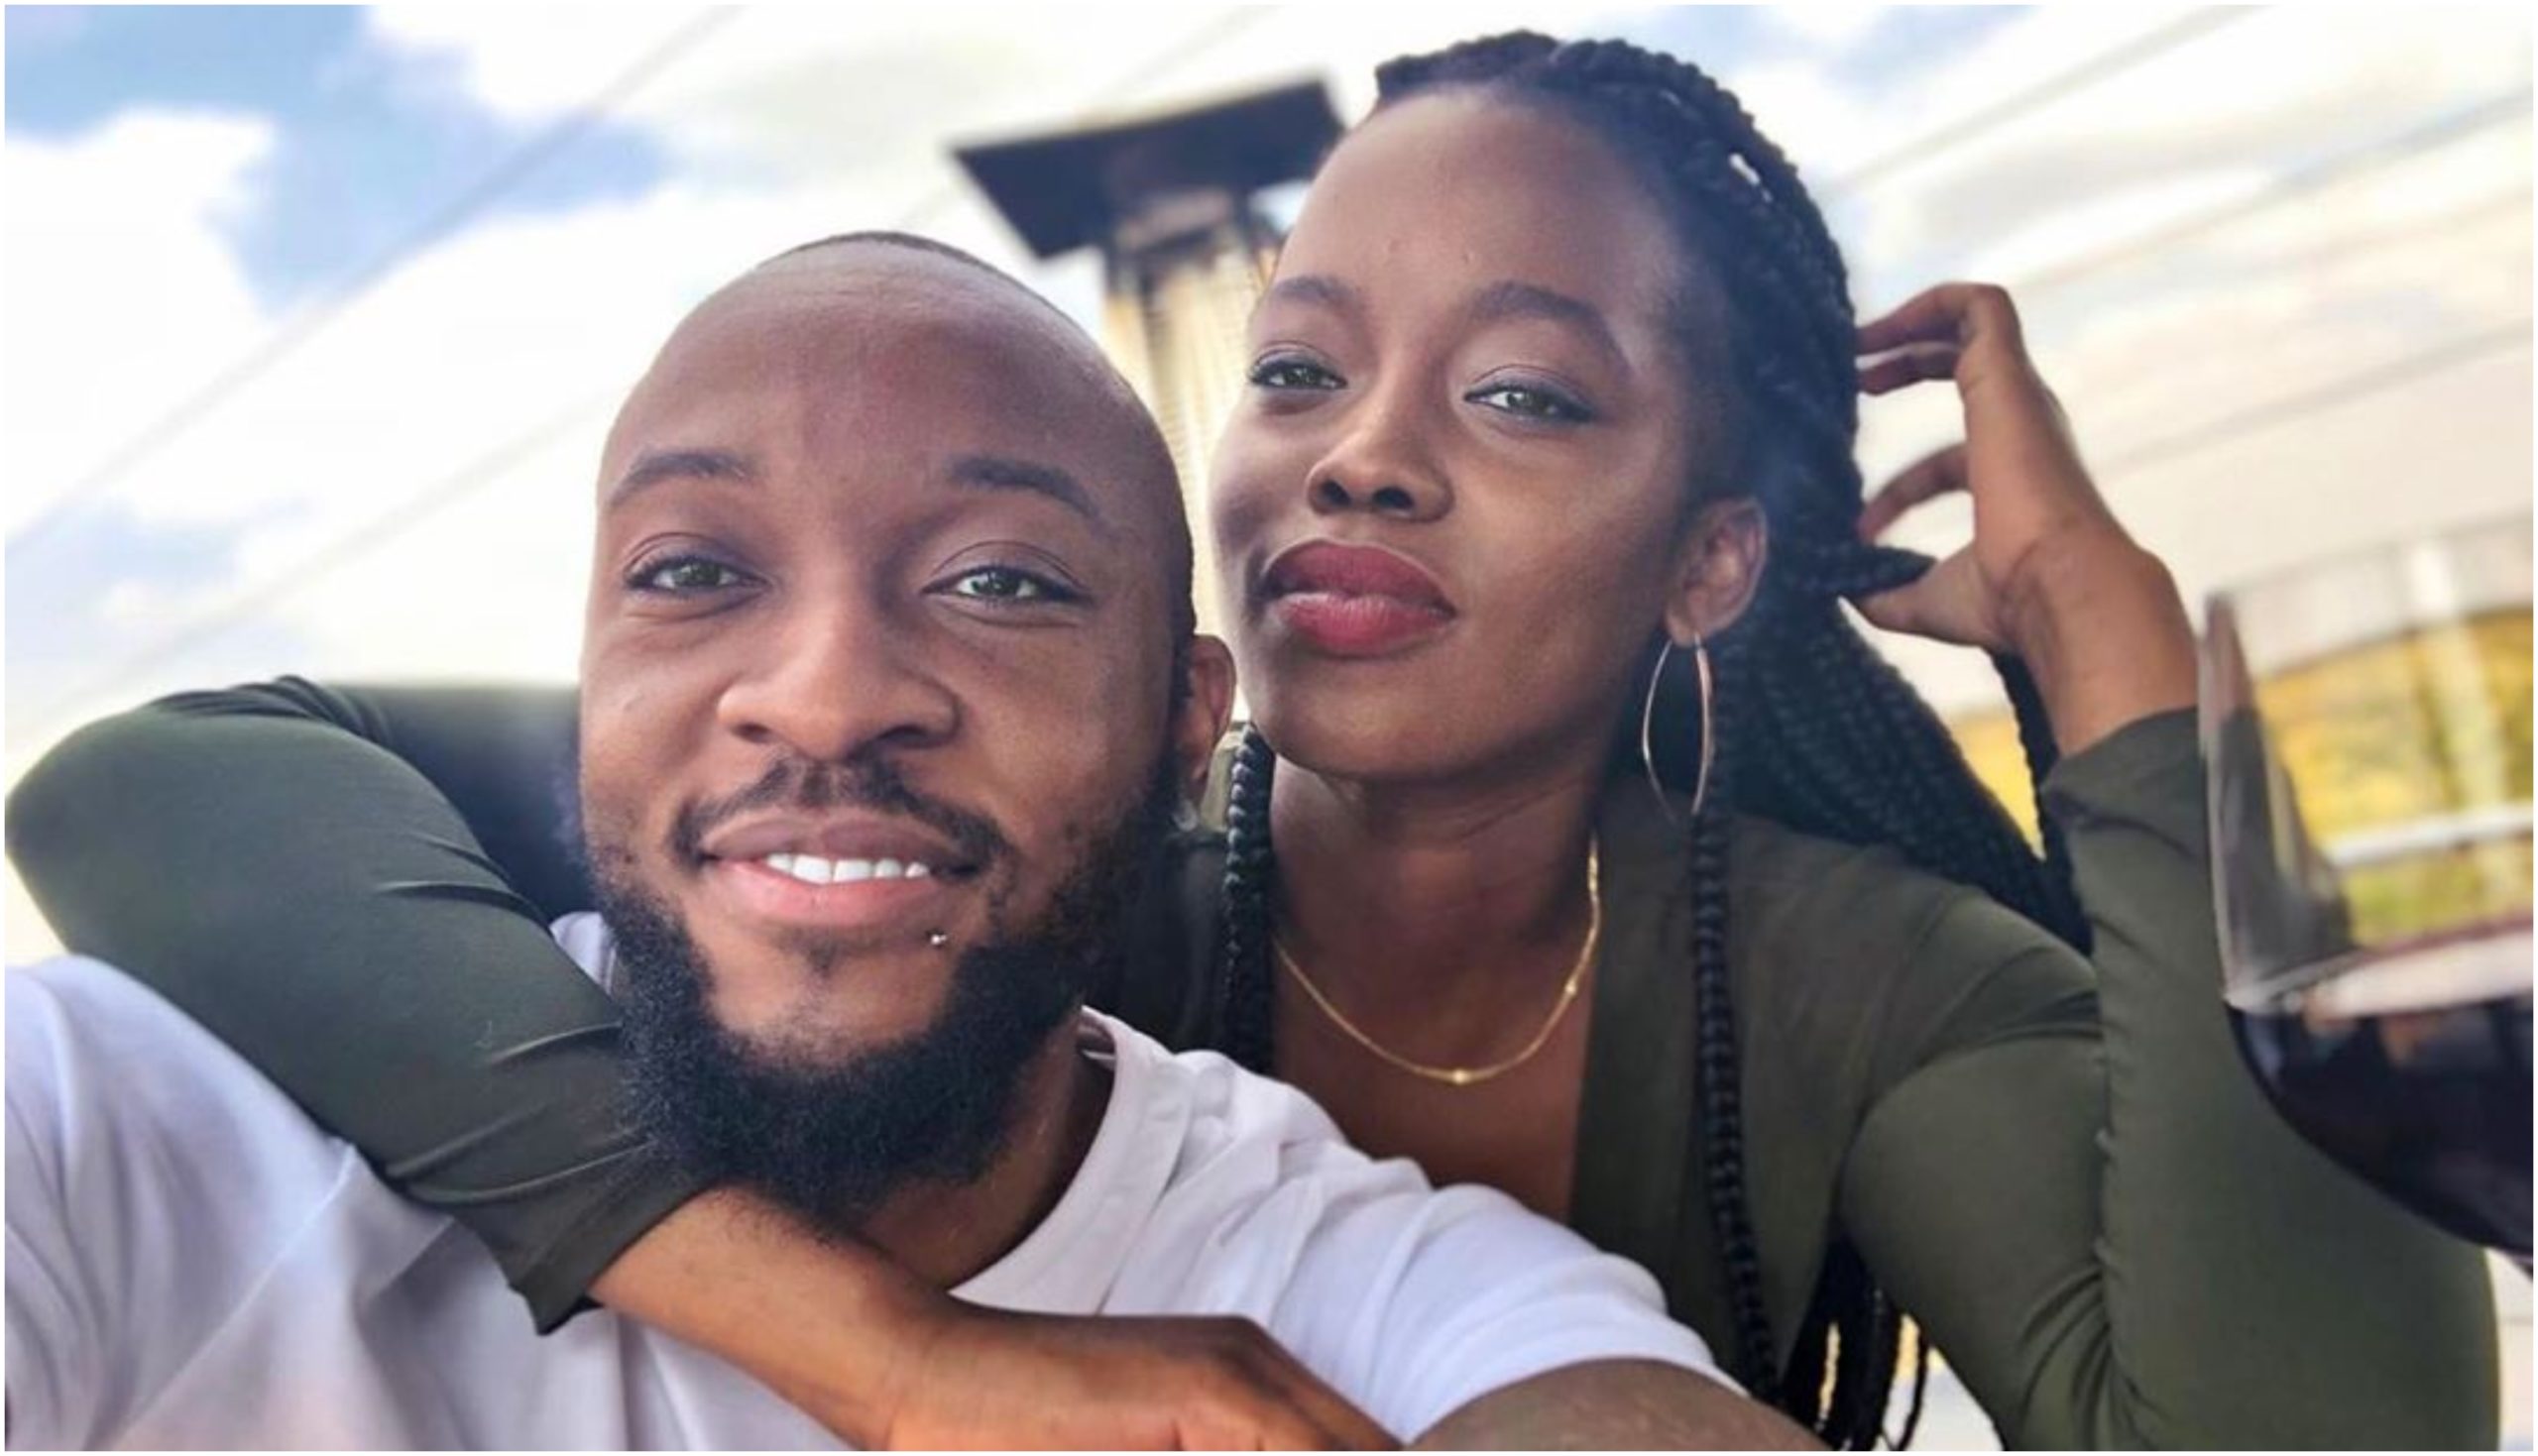 Trouble in paradise already? Corazon Kwamboka sending mixed signals with new post